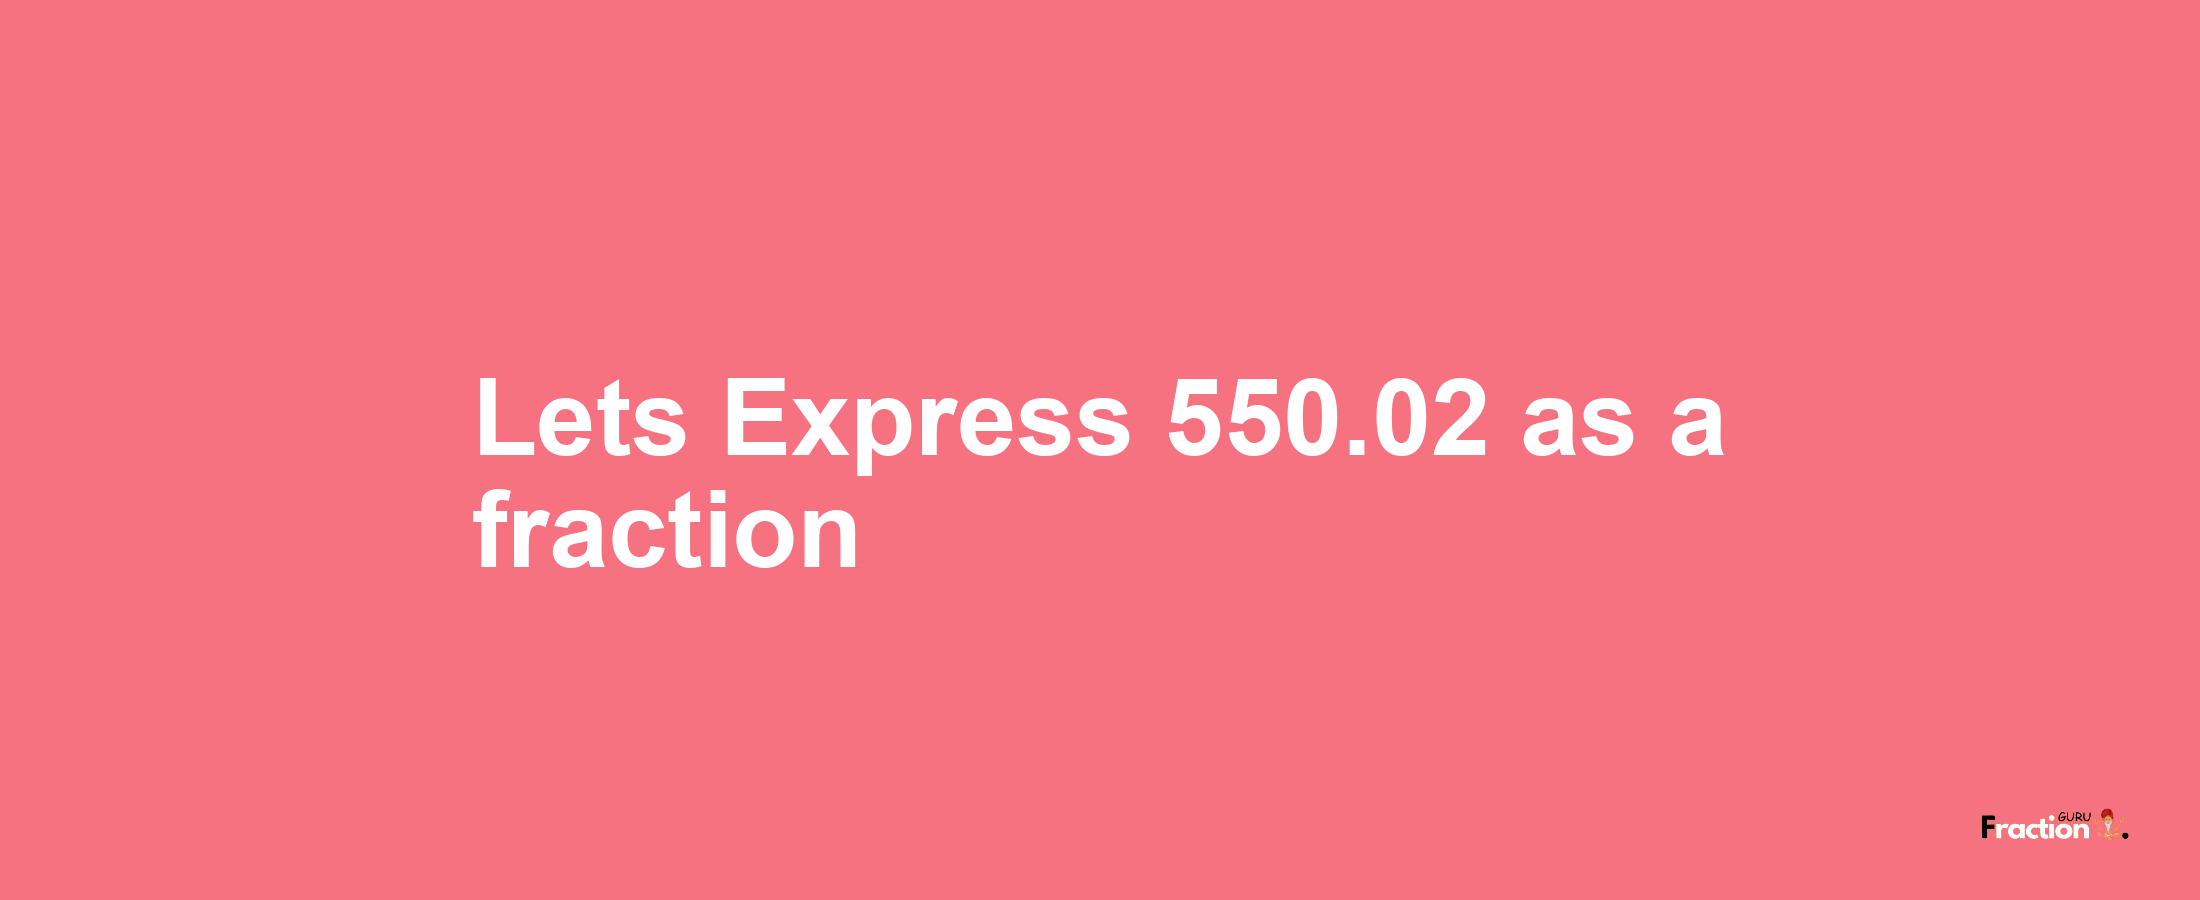 Lets Express 550.02 as afraction